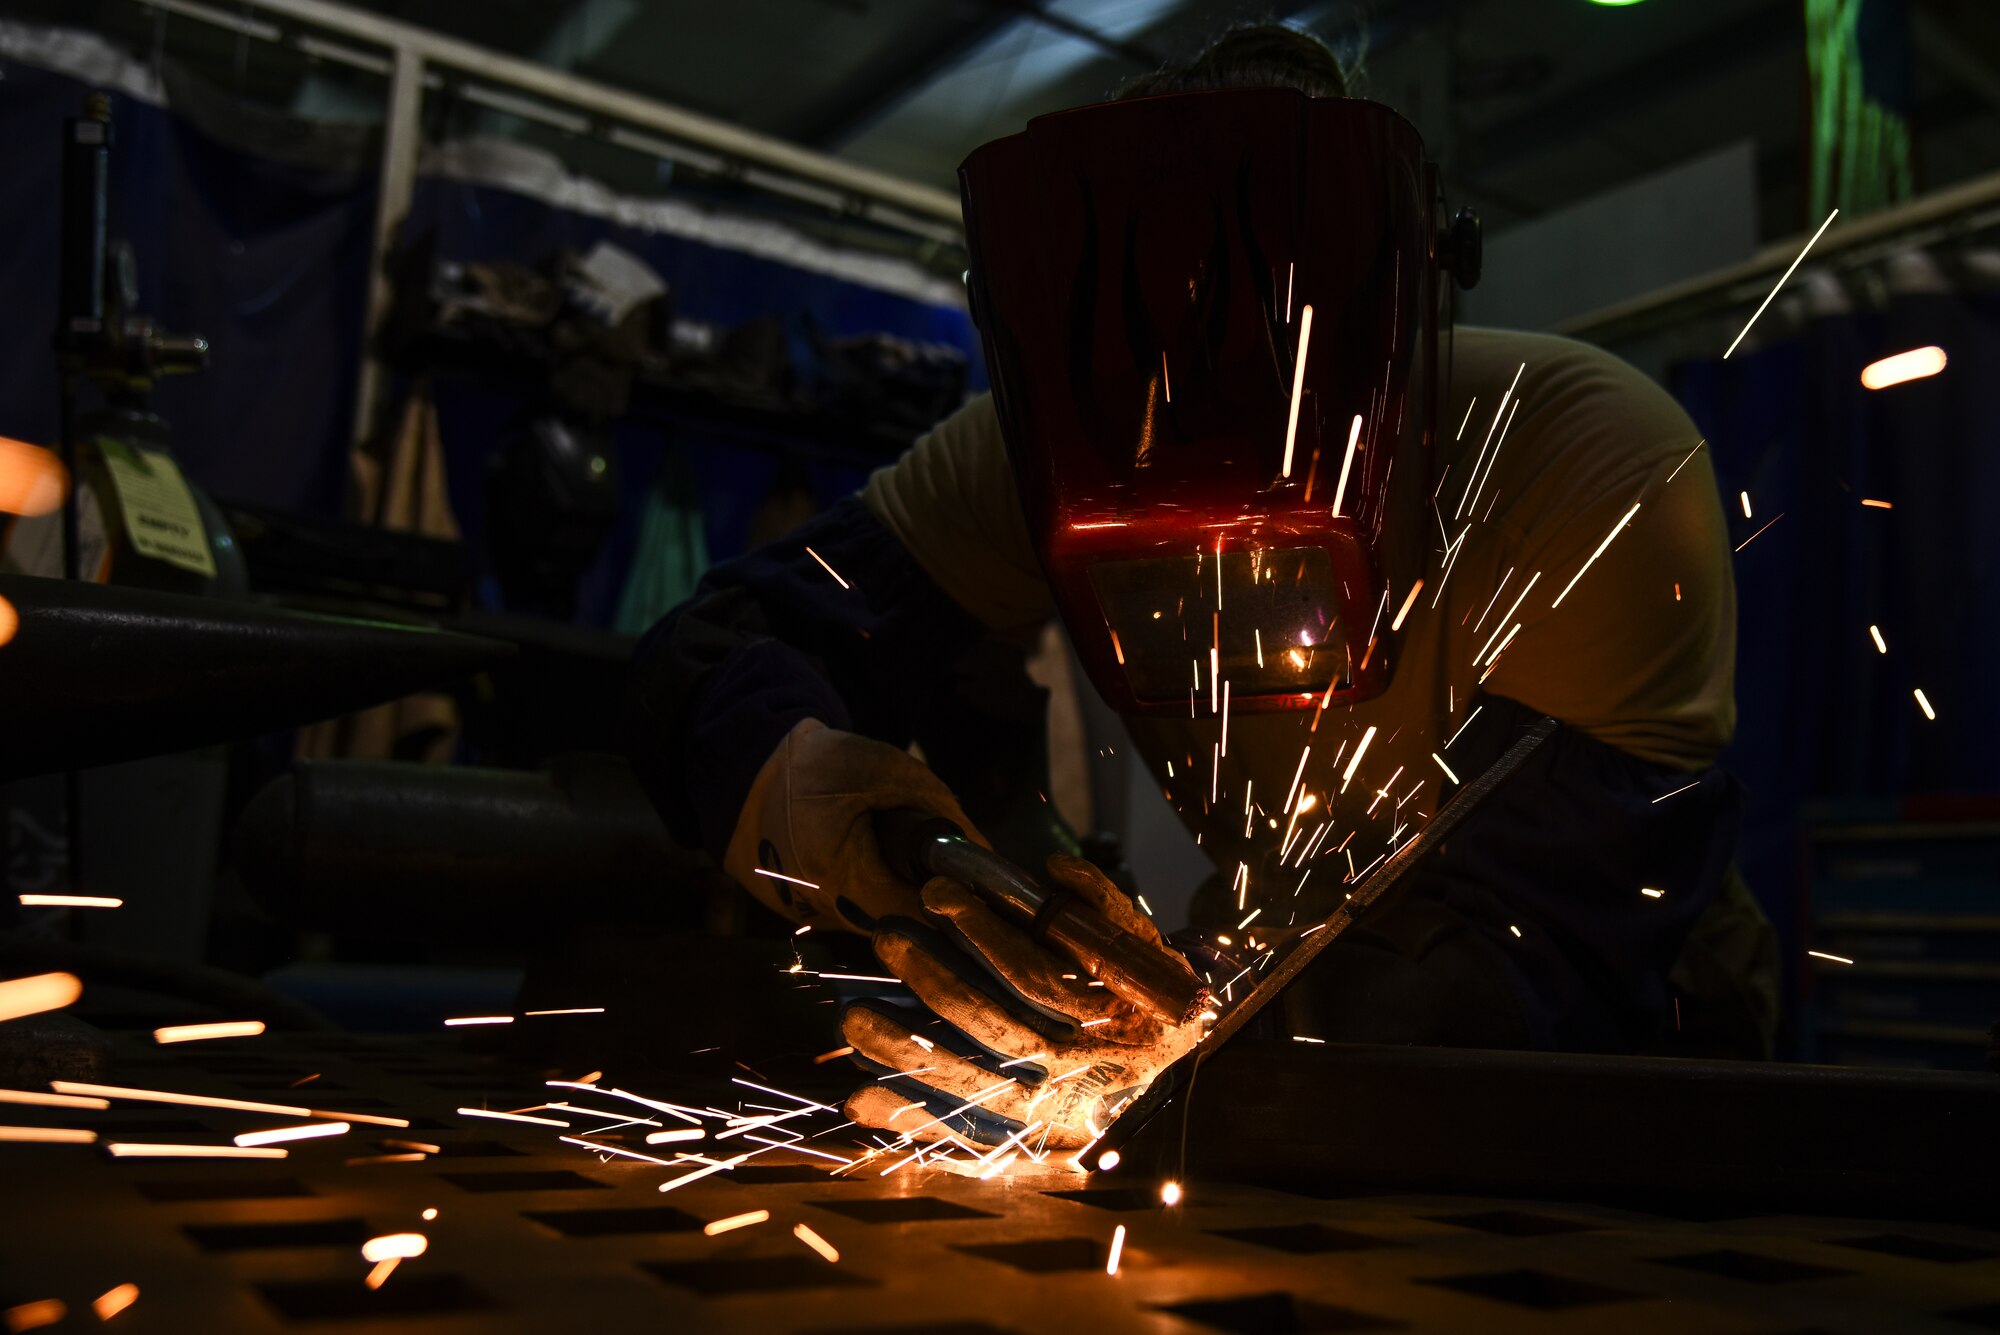 U.S. Air Force Senior Airman Courtnee Grafton, 380th Expeditionary Maintenance Squadron metal technician, welds a piece of metal at Al Dhafra Air Base, United Arab Emirates, Dec. 9, 2018. The 380th EMXS fabrication flight is in charge of identifying and repairing aircraft structural damage.  (U.S. Air Force photo by Senior Airman Mya M. Crosby)